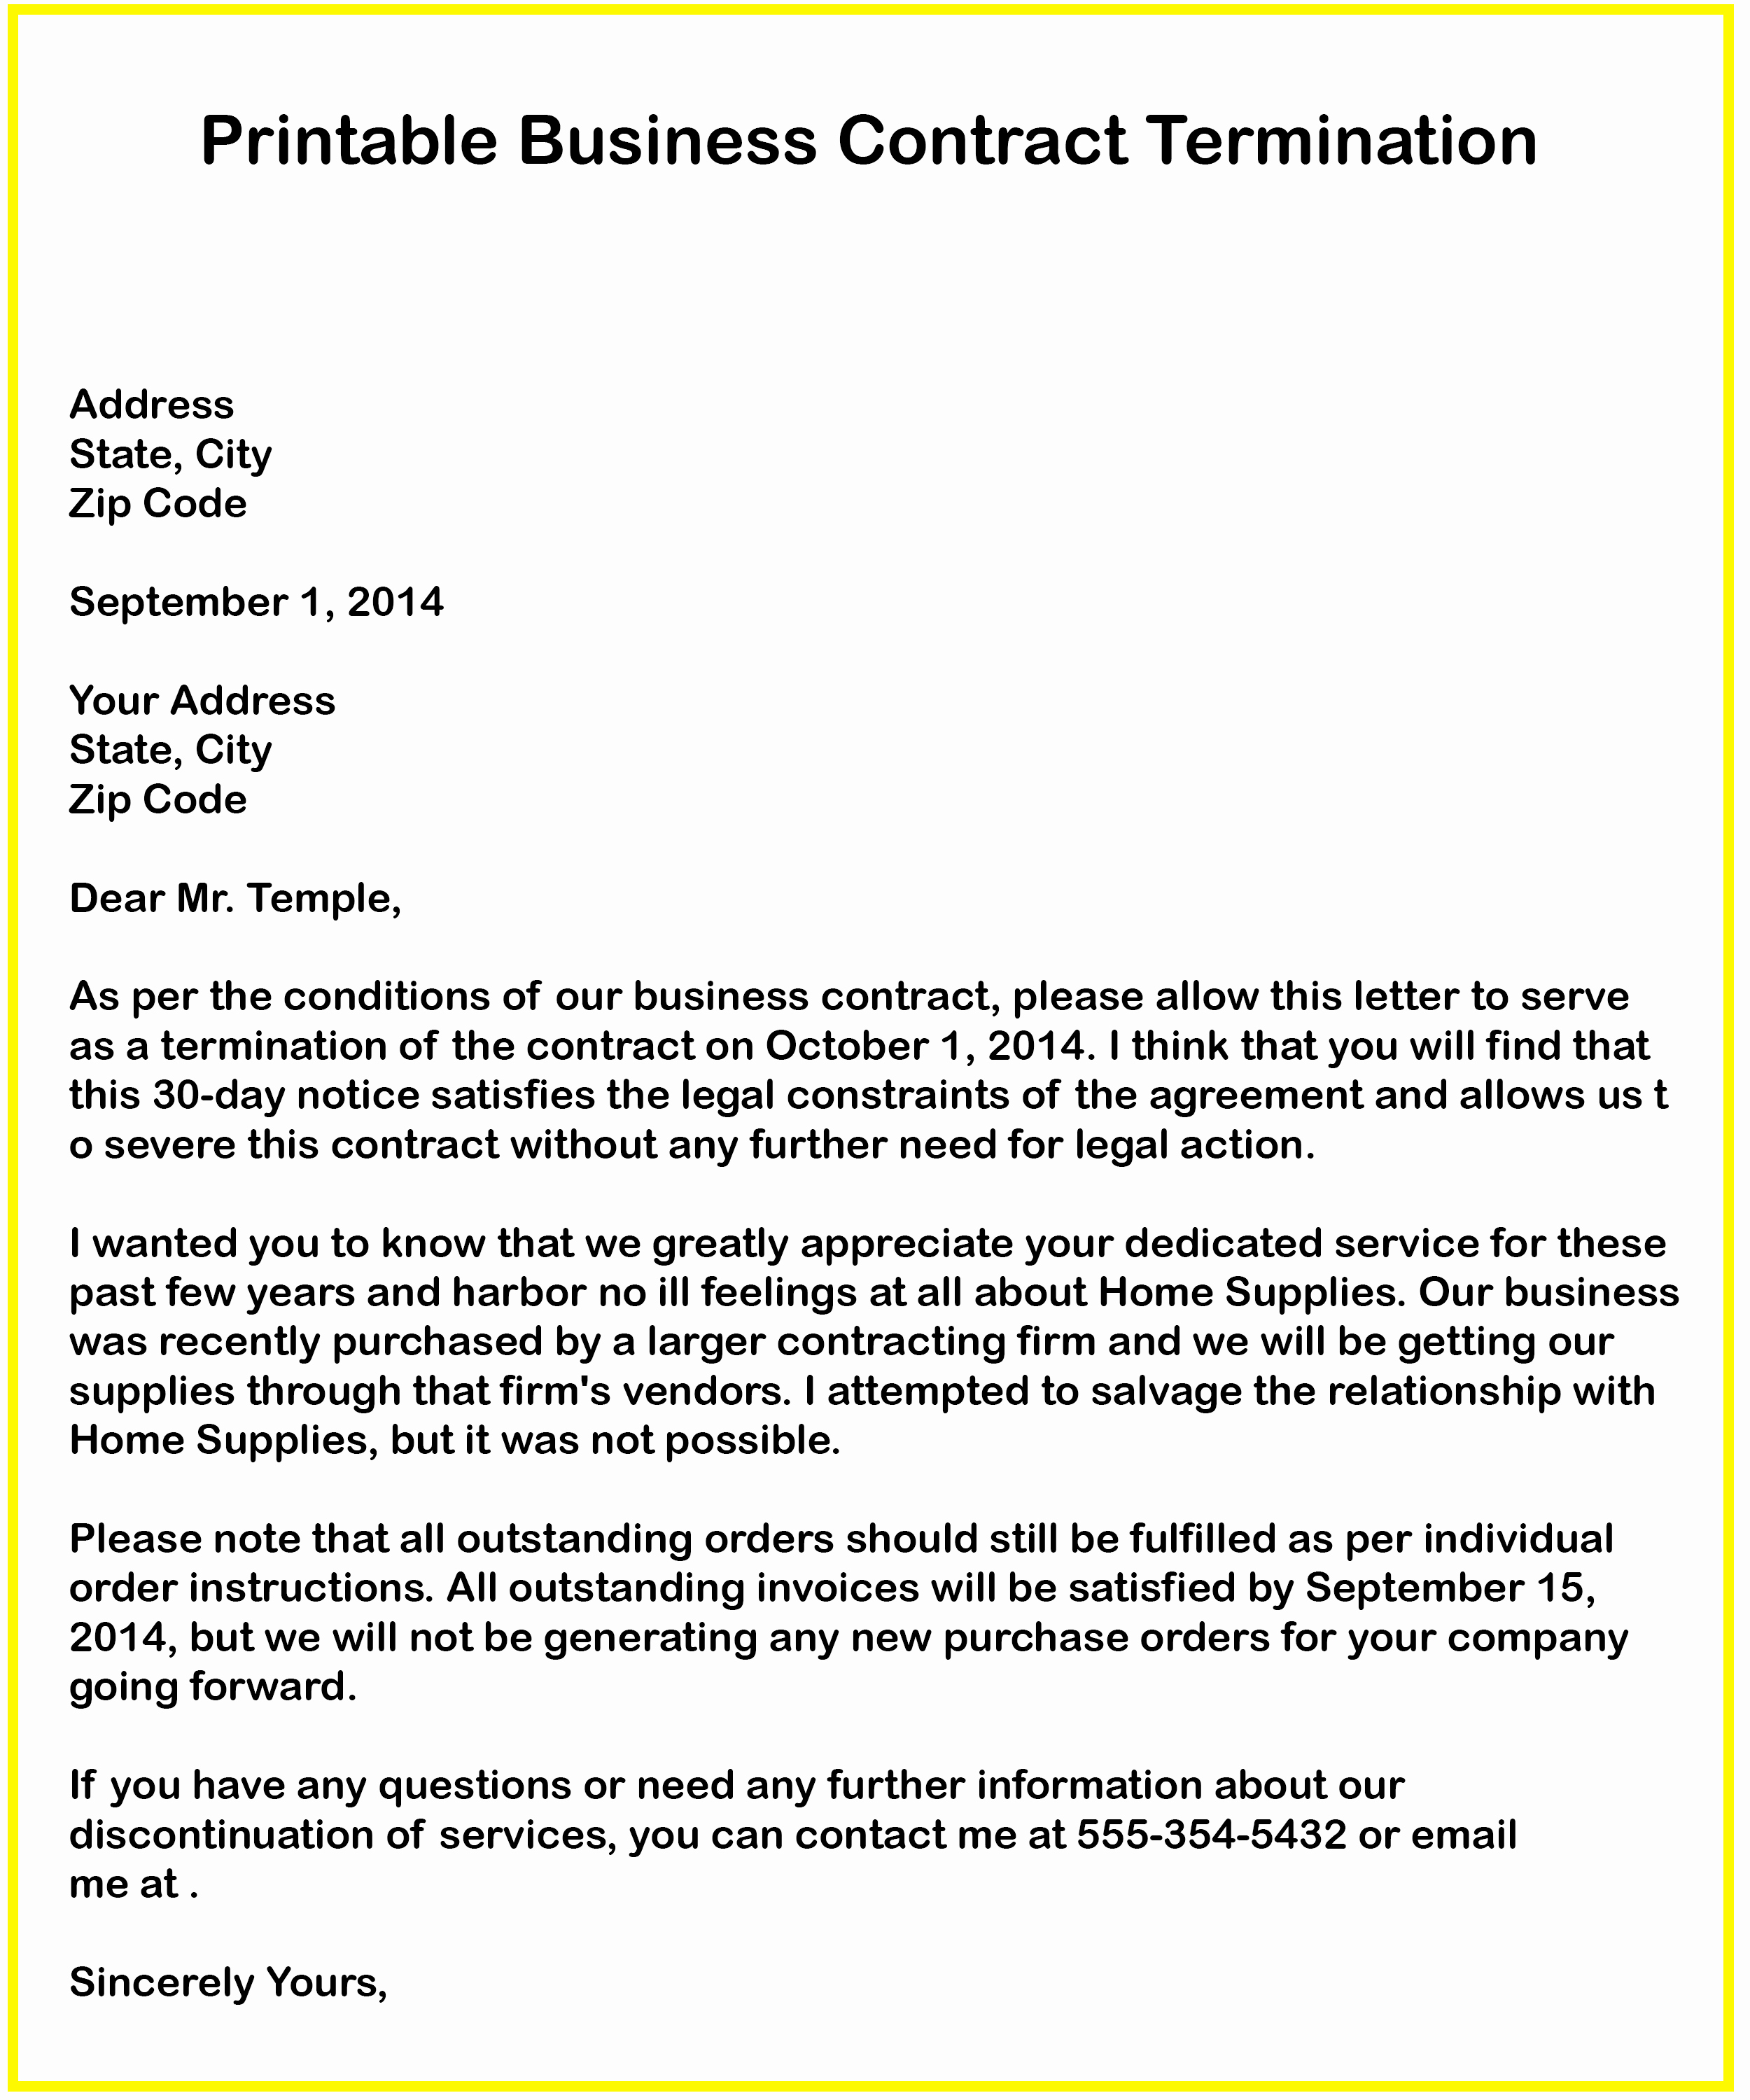 Business Contract Termination Letter Template Fresh 4 Free Business Contract Termination Letter with Example